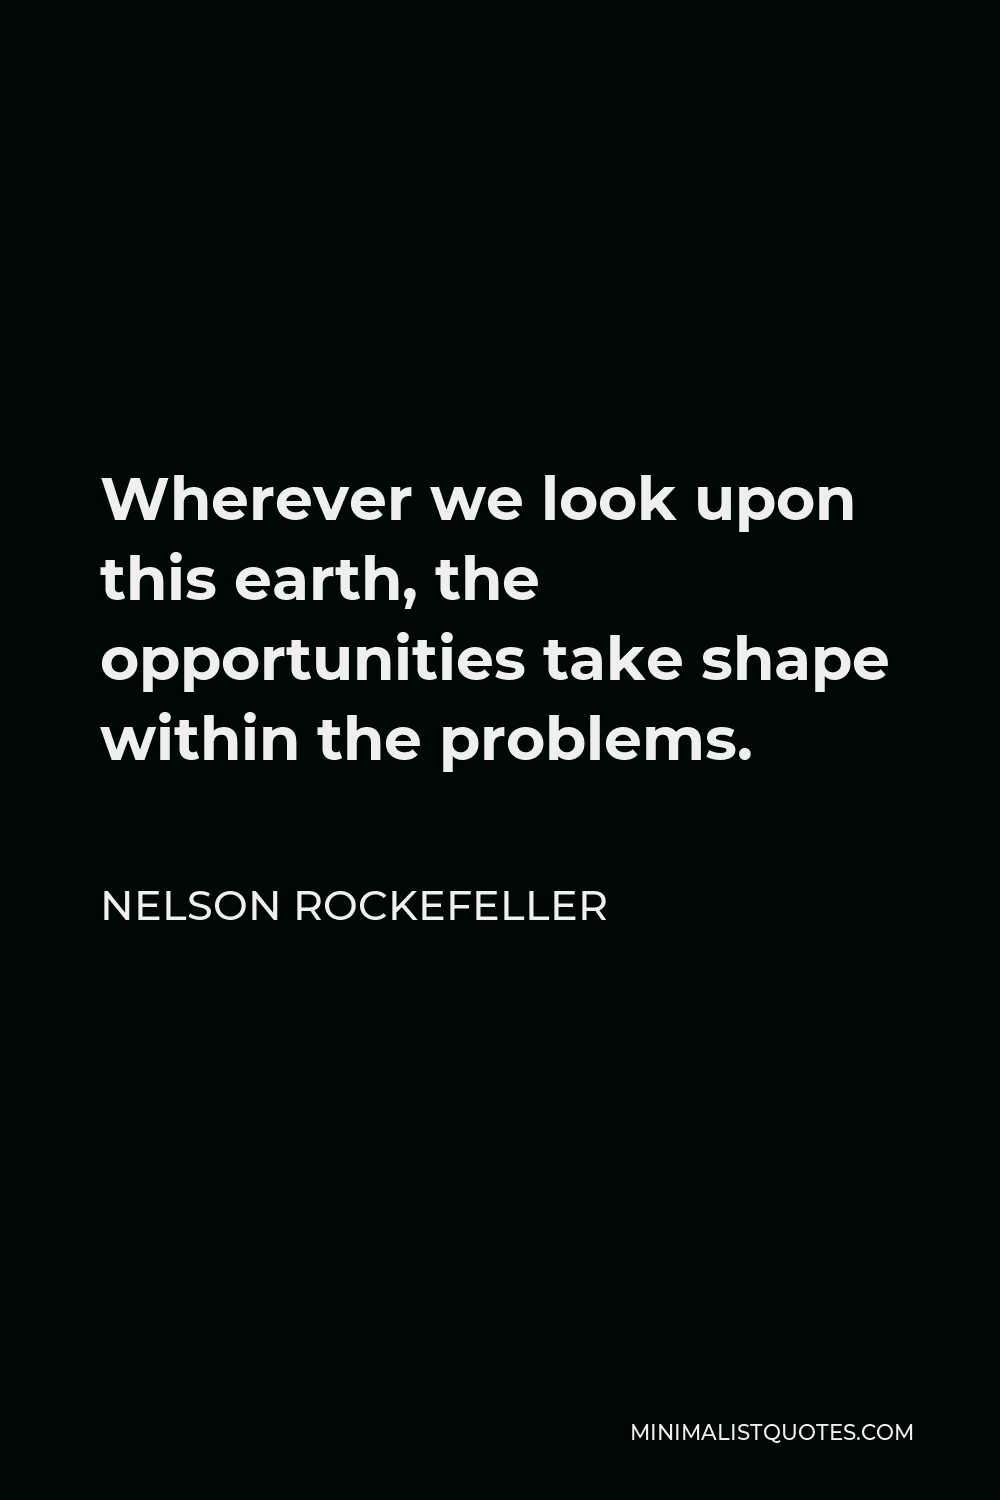 Nelson Rockefeller Quote - Wherever we look upon this earth, the opportunities take shape within the problems.